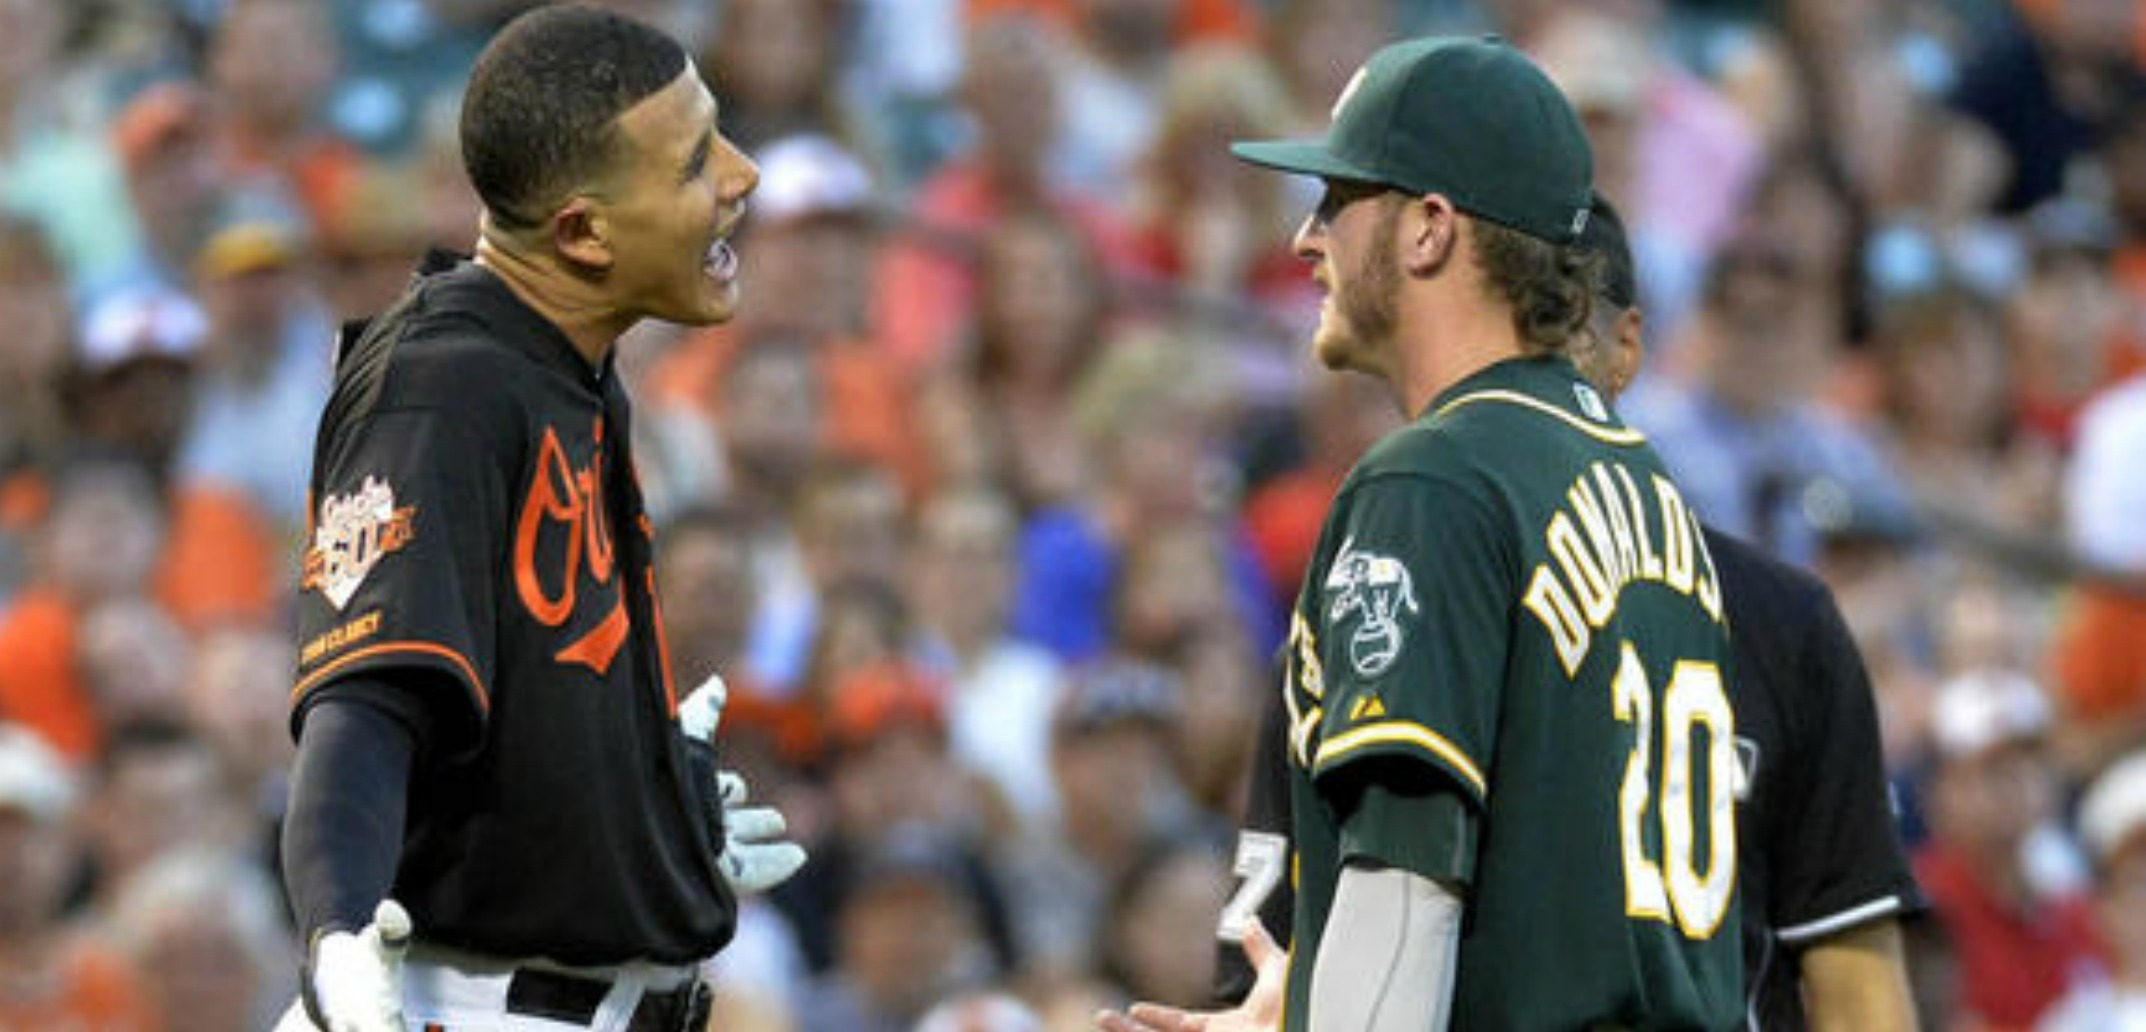 Baltimore Orioles: Manny Machado is Anything But a Man2146 x 1032